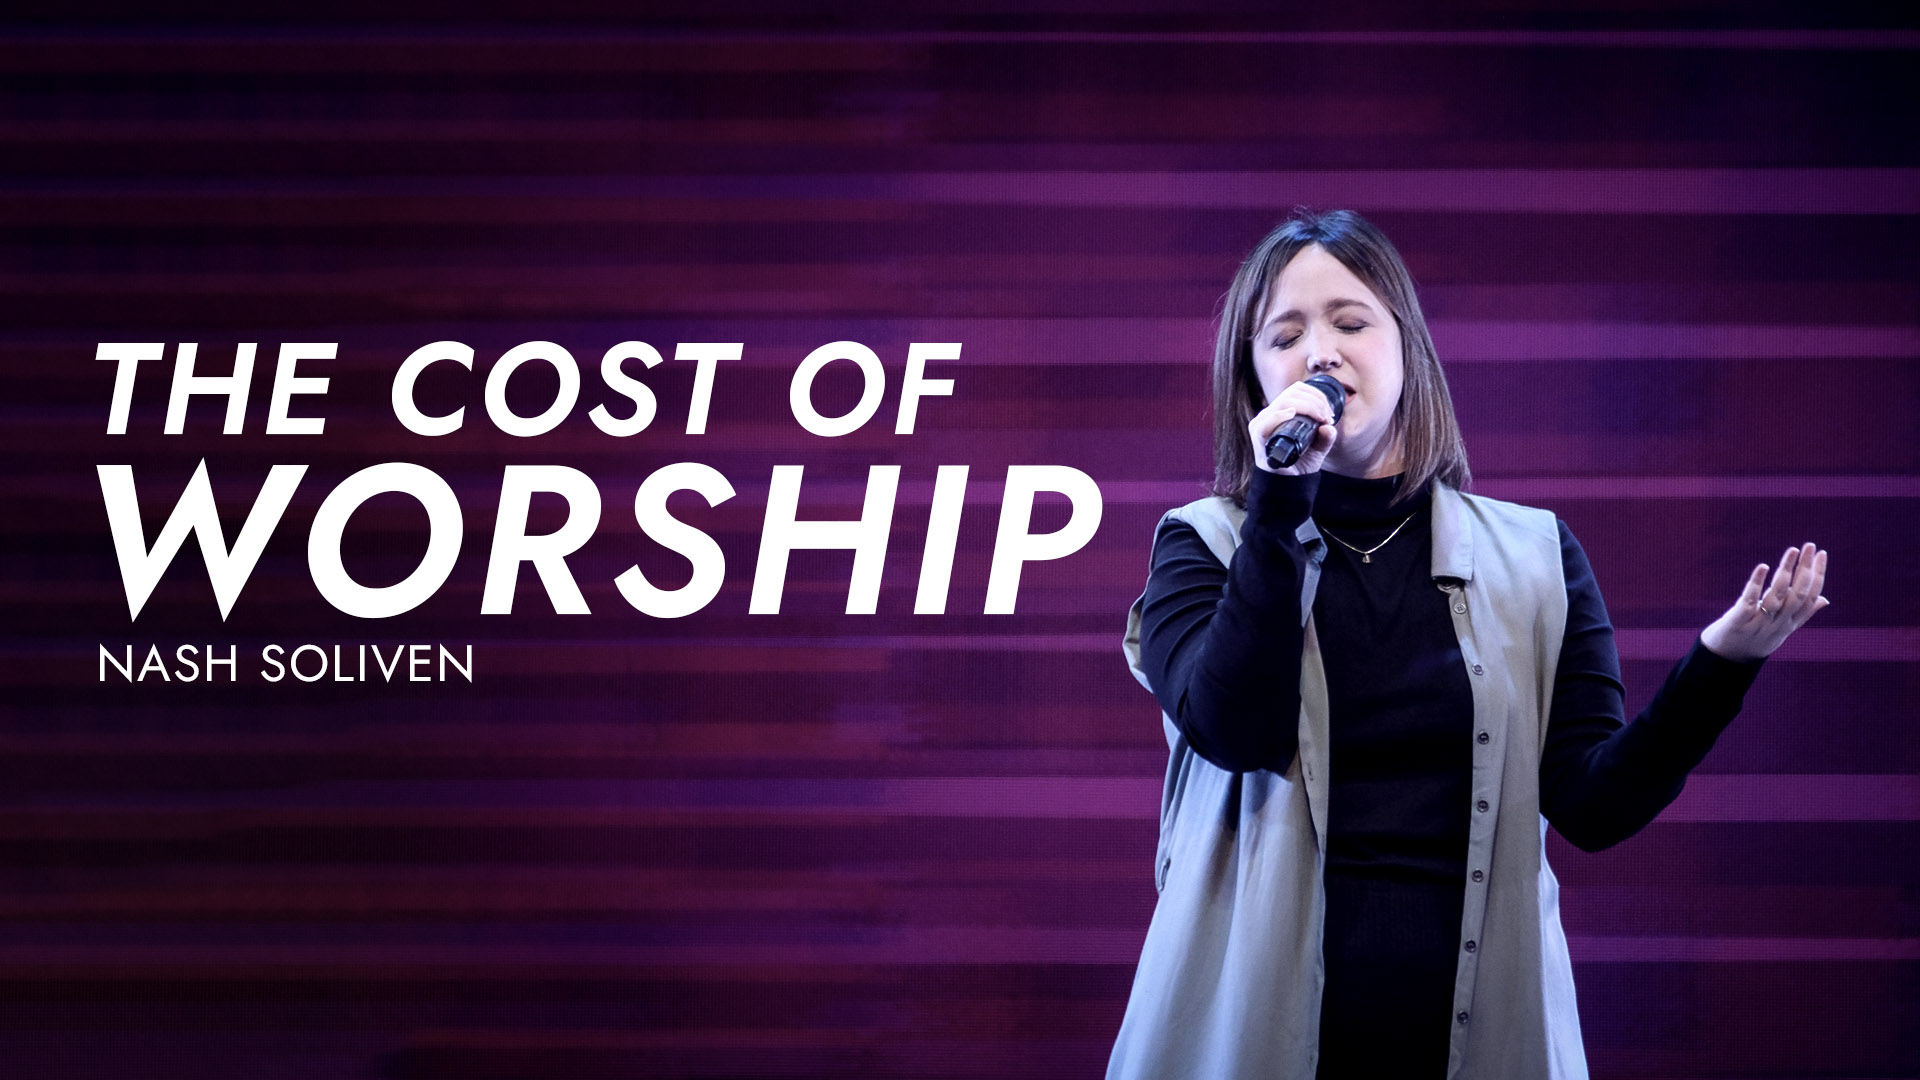 THE COST OF WORSHIP Image